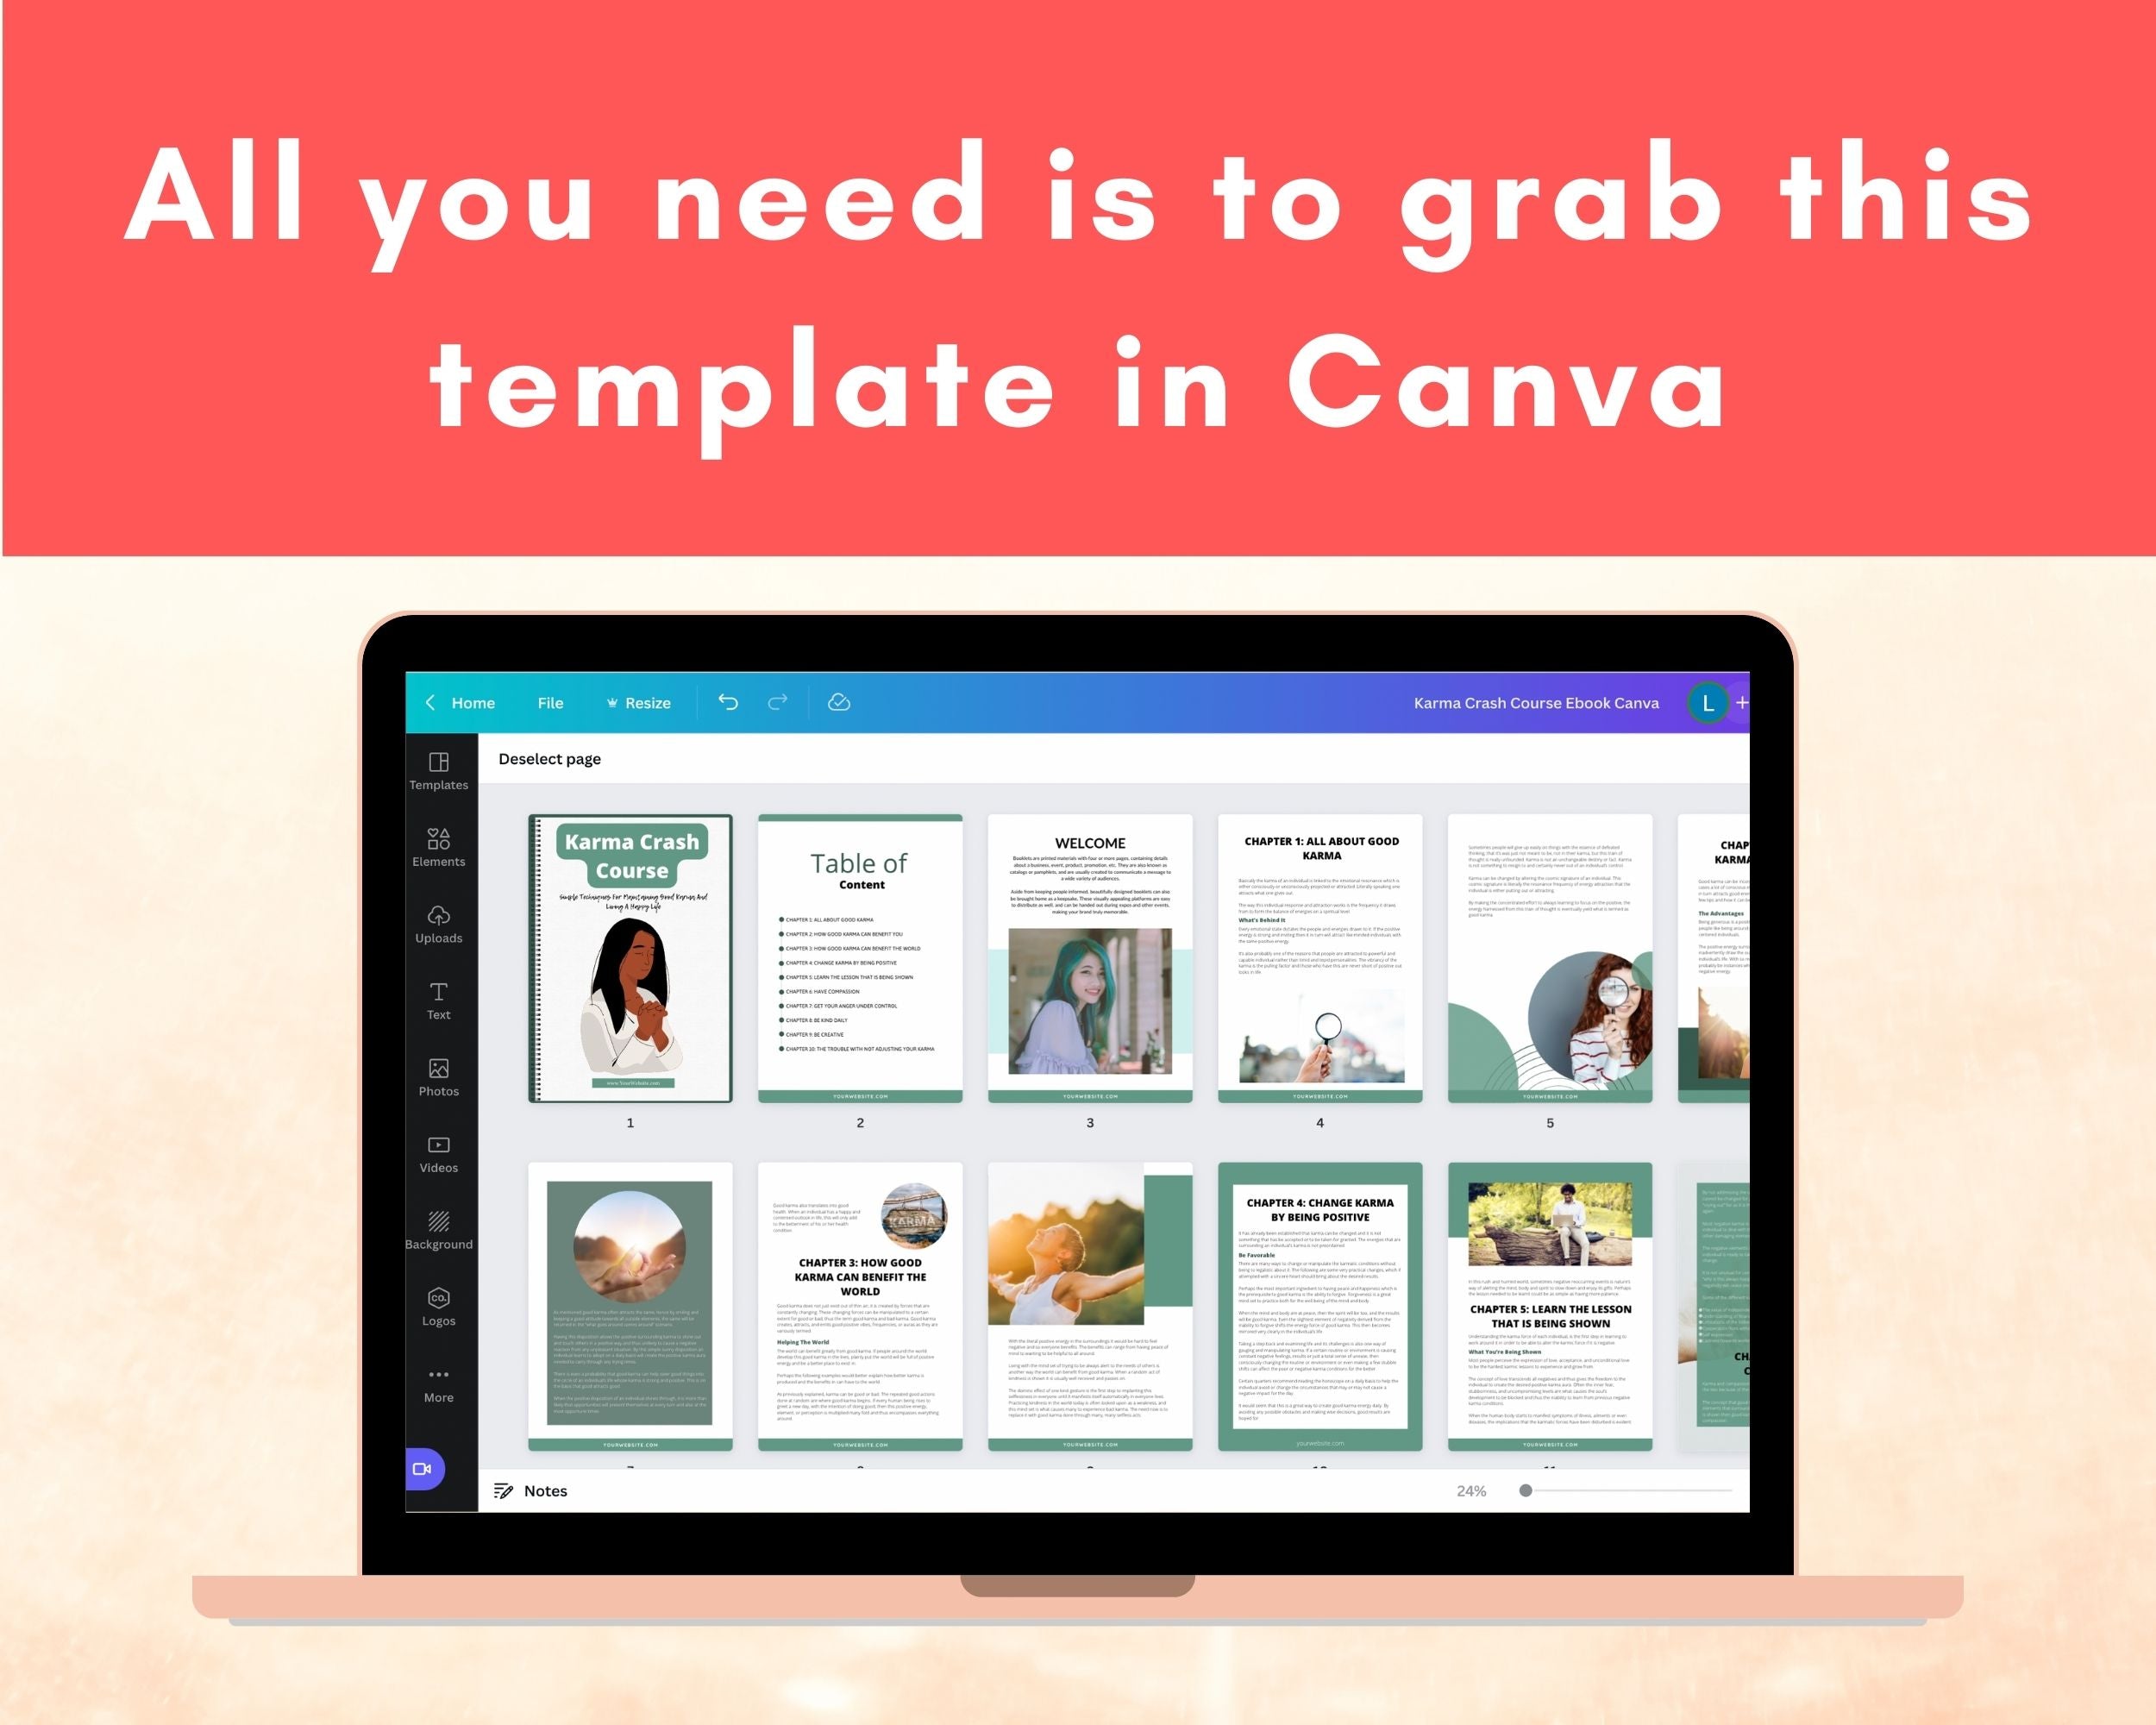 Editable Karma Crash Course Mini Ebook | Done-for-You Ebook in Canva | Rebrandable and Resizable Canva Template